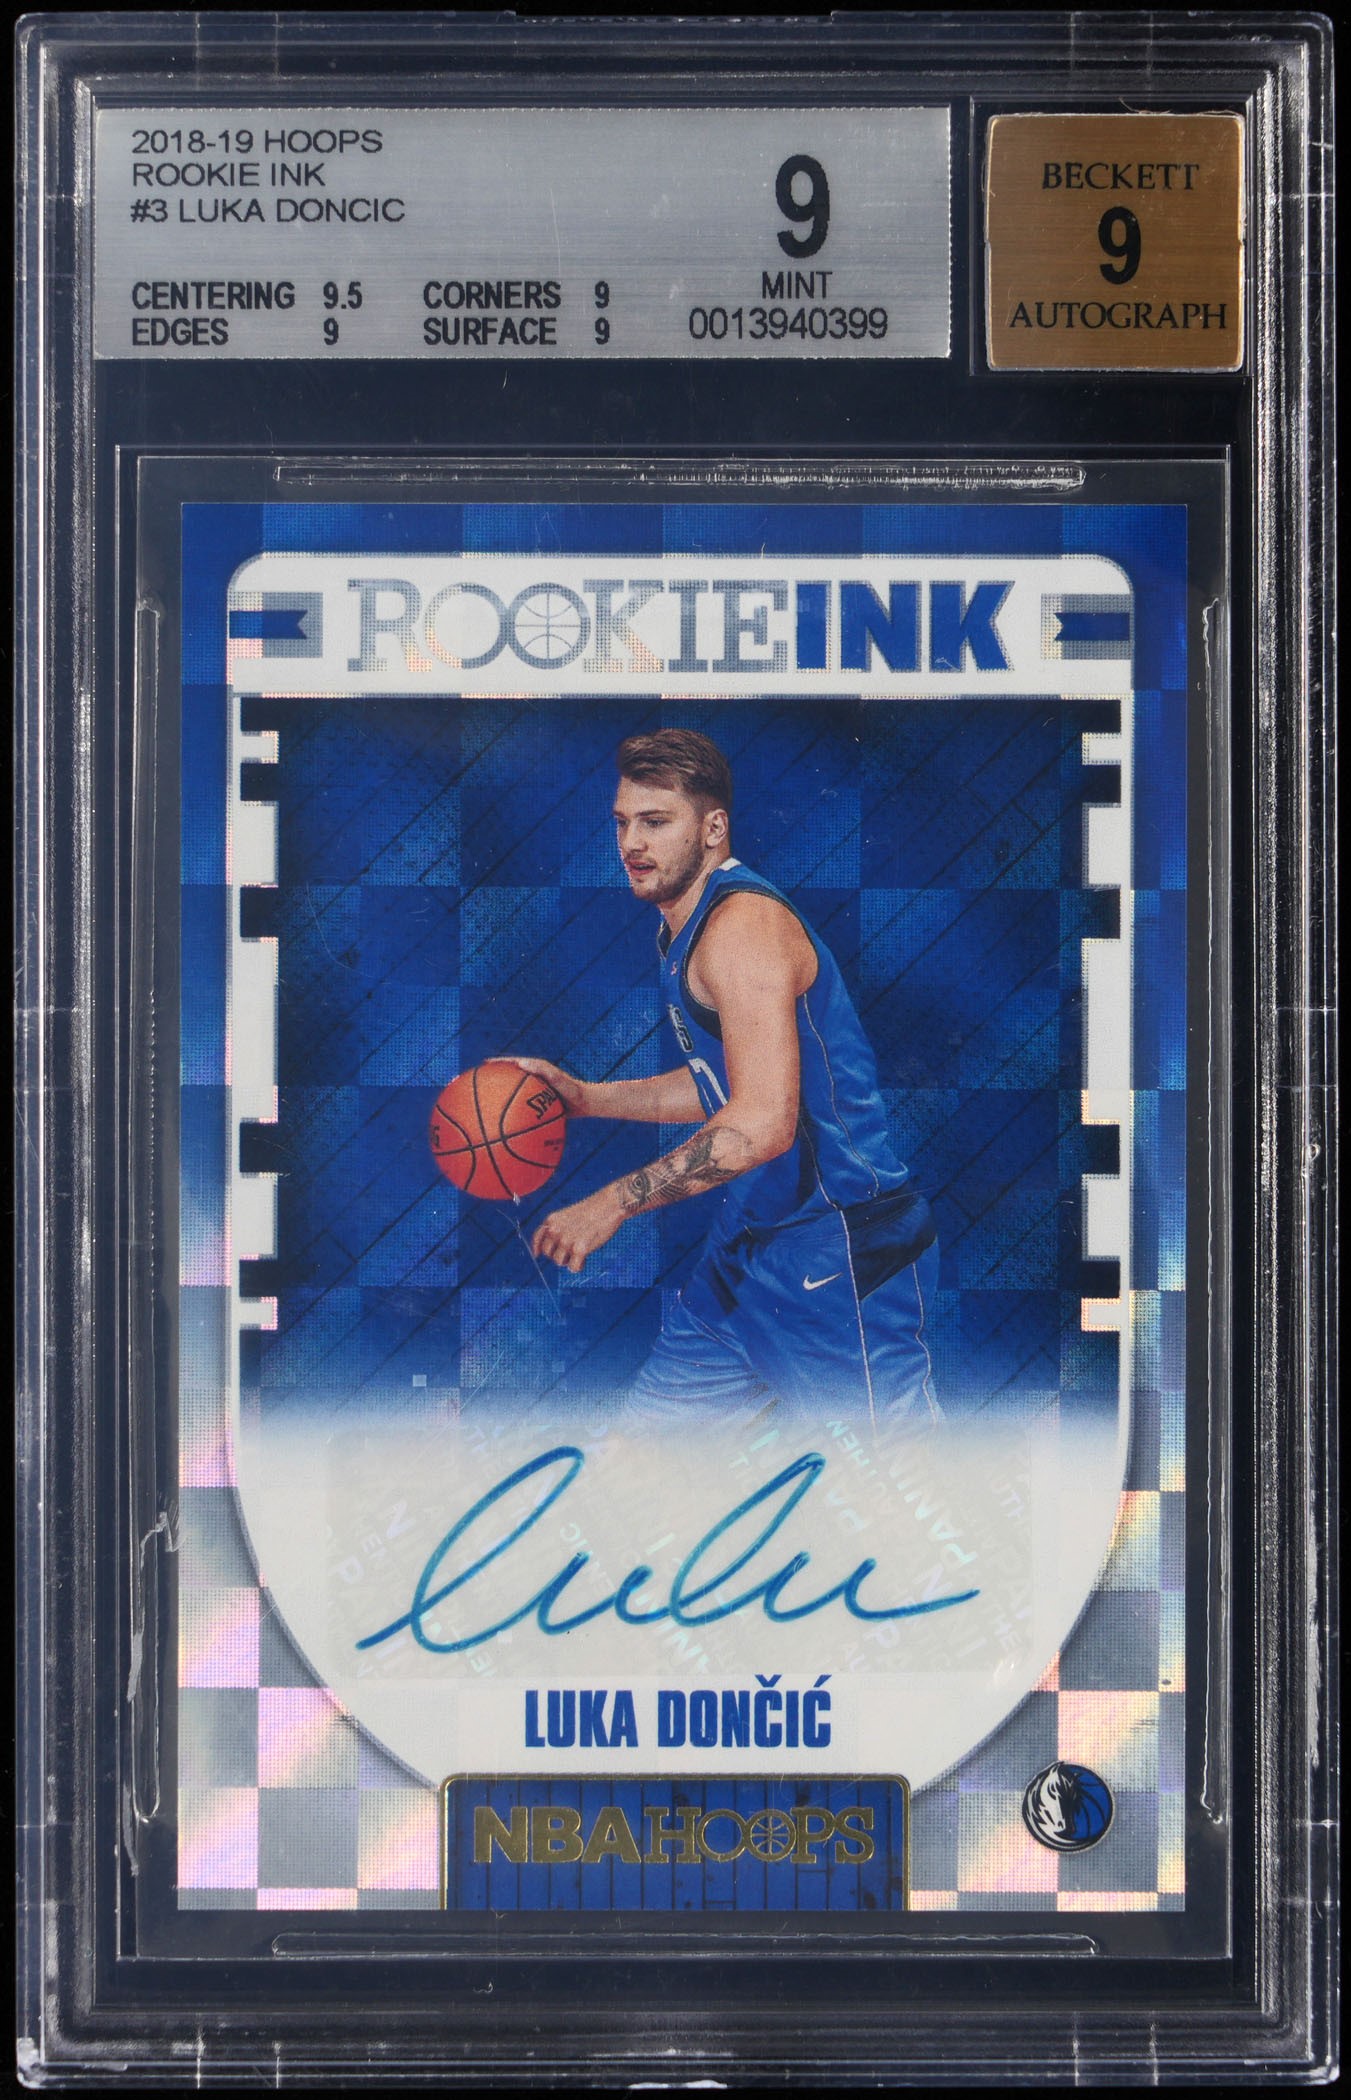 2018-2019 Hoops Basketball Rookie Ink Luka Doncic BGS MINT 9 with Beckett 9 Autograph Grade